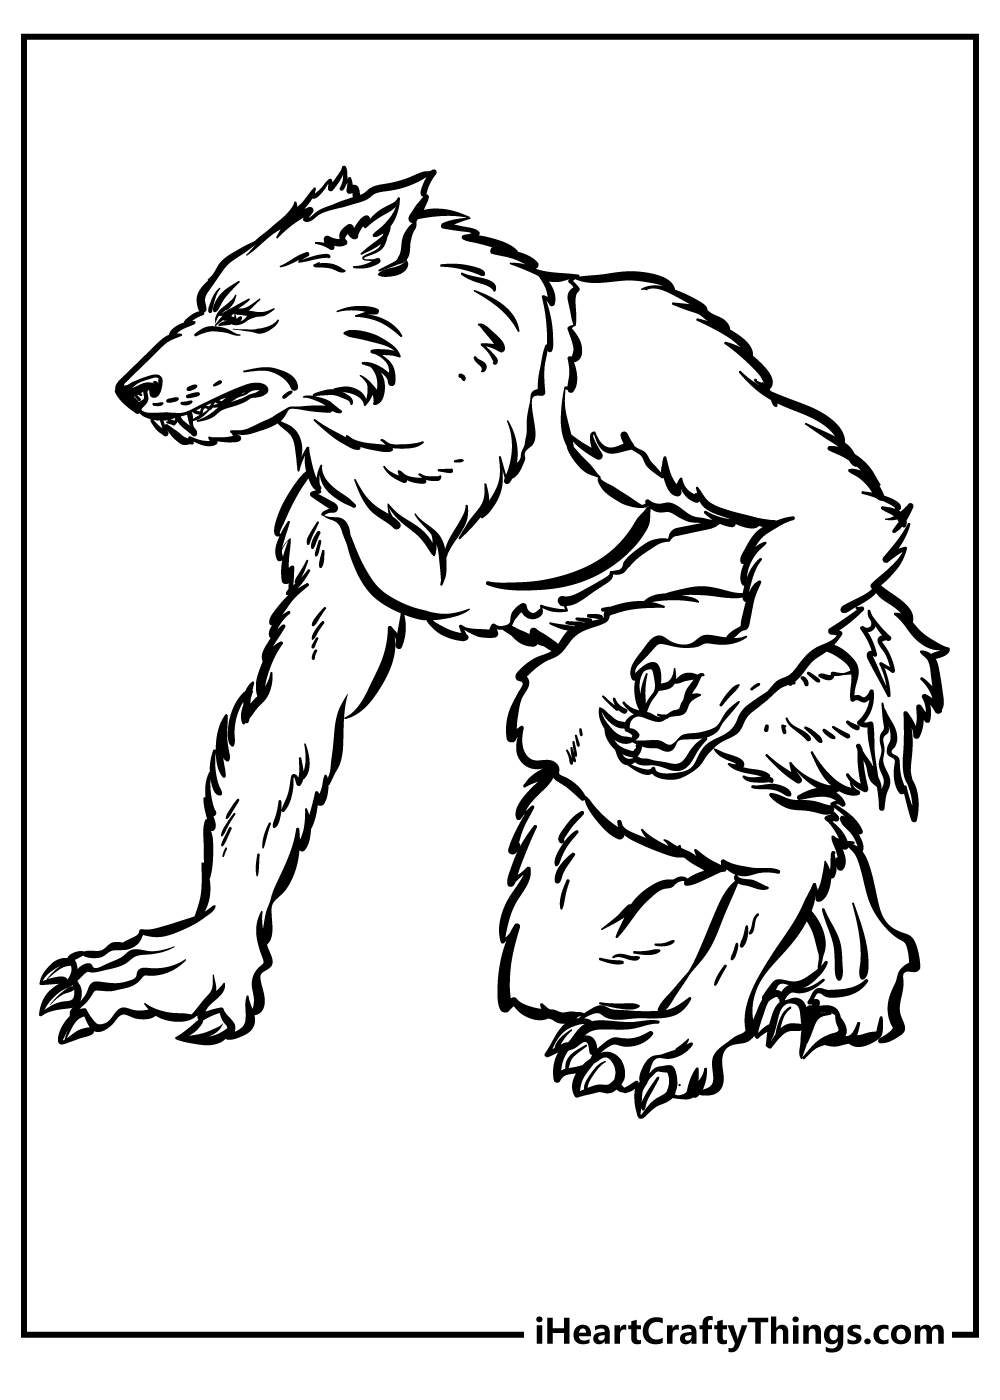 Werewolf Coloring Book for kids free printable